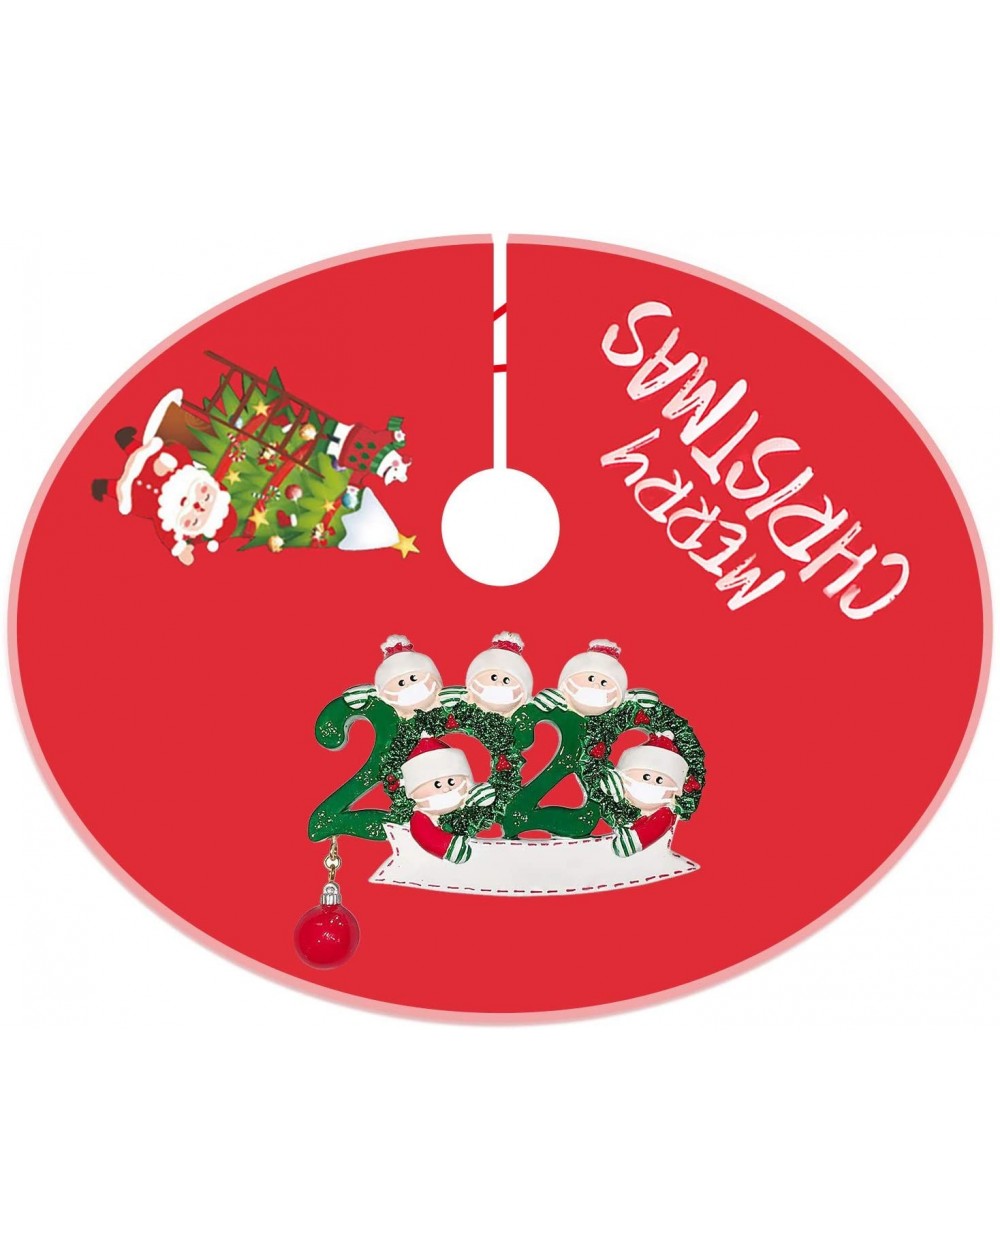 Tree Skirts Merry Christmas Tree Skirt Red- 2020 Quarantine Personalized Survived Family Customized Christmas Tree Skirt Xmas...